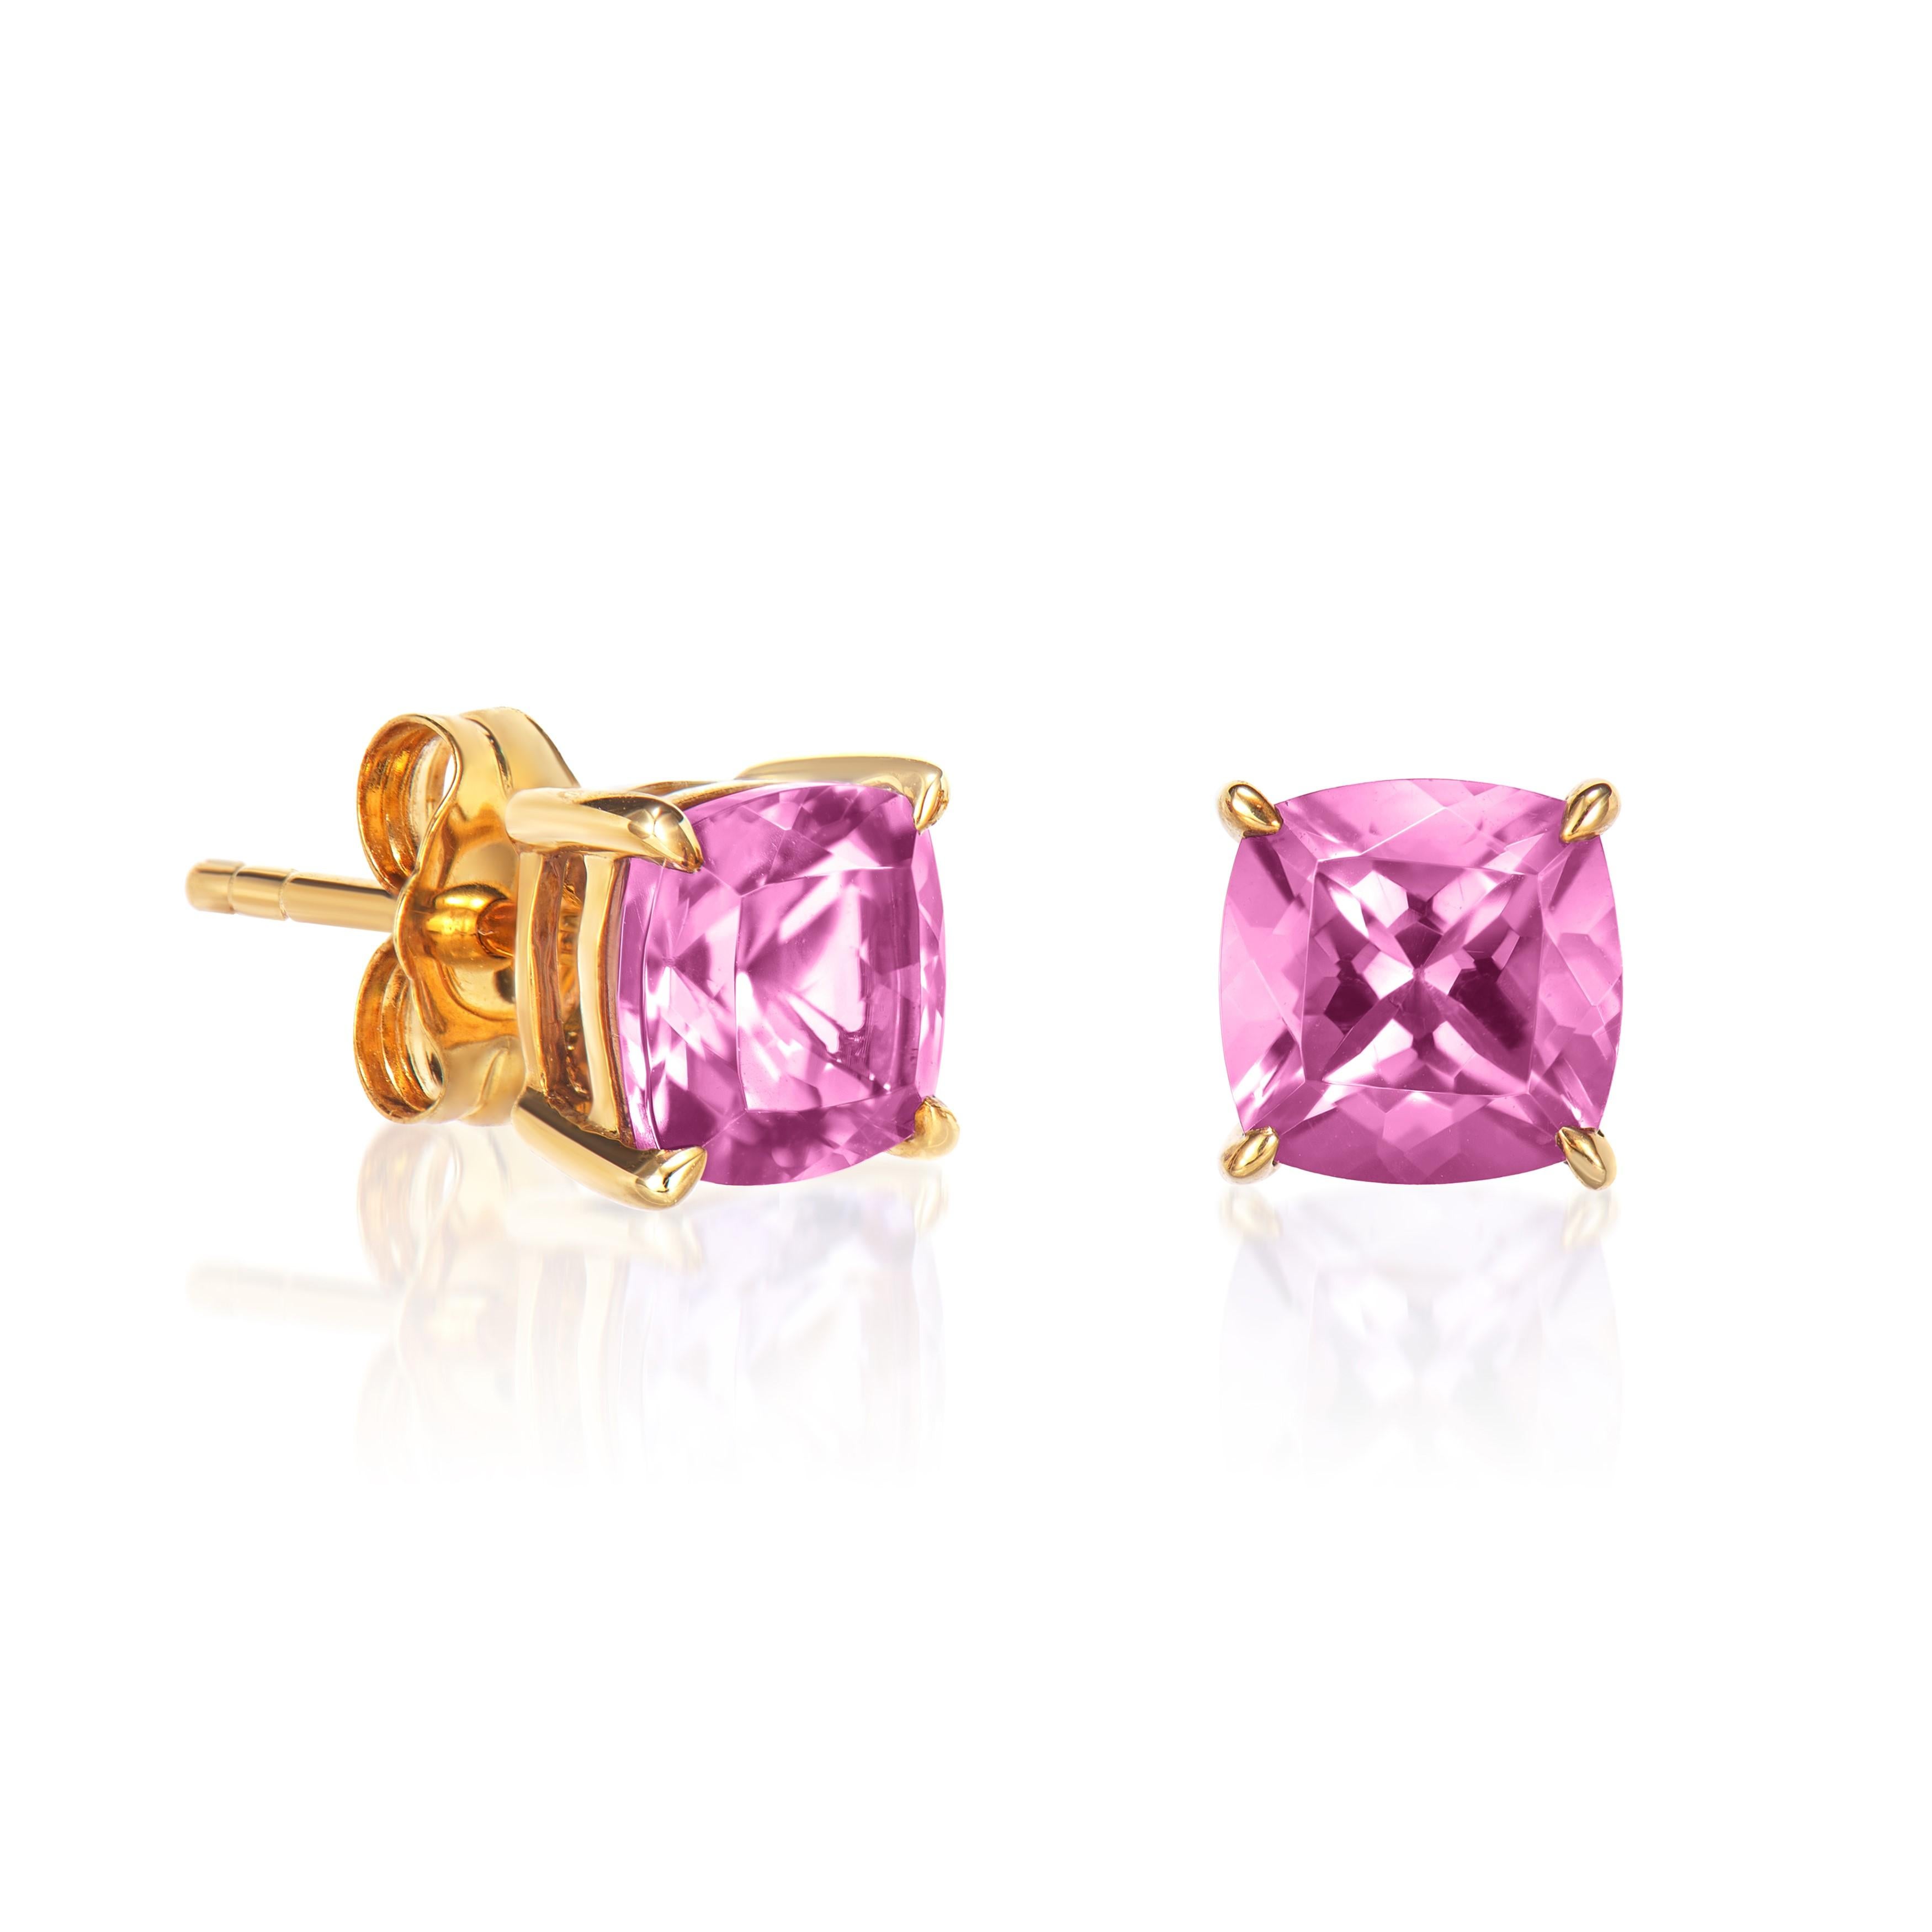 Presented A lovely collection of gems, including Rhodolite, Peridot, Amethyst, Sky Blue Topaz and Swiss Blue Topaz is perfect for people who value quality and want to wear it to any occasion or celebration. The yellow gold Rhodolite Stud Earrings